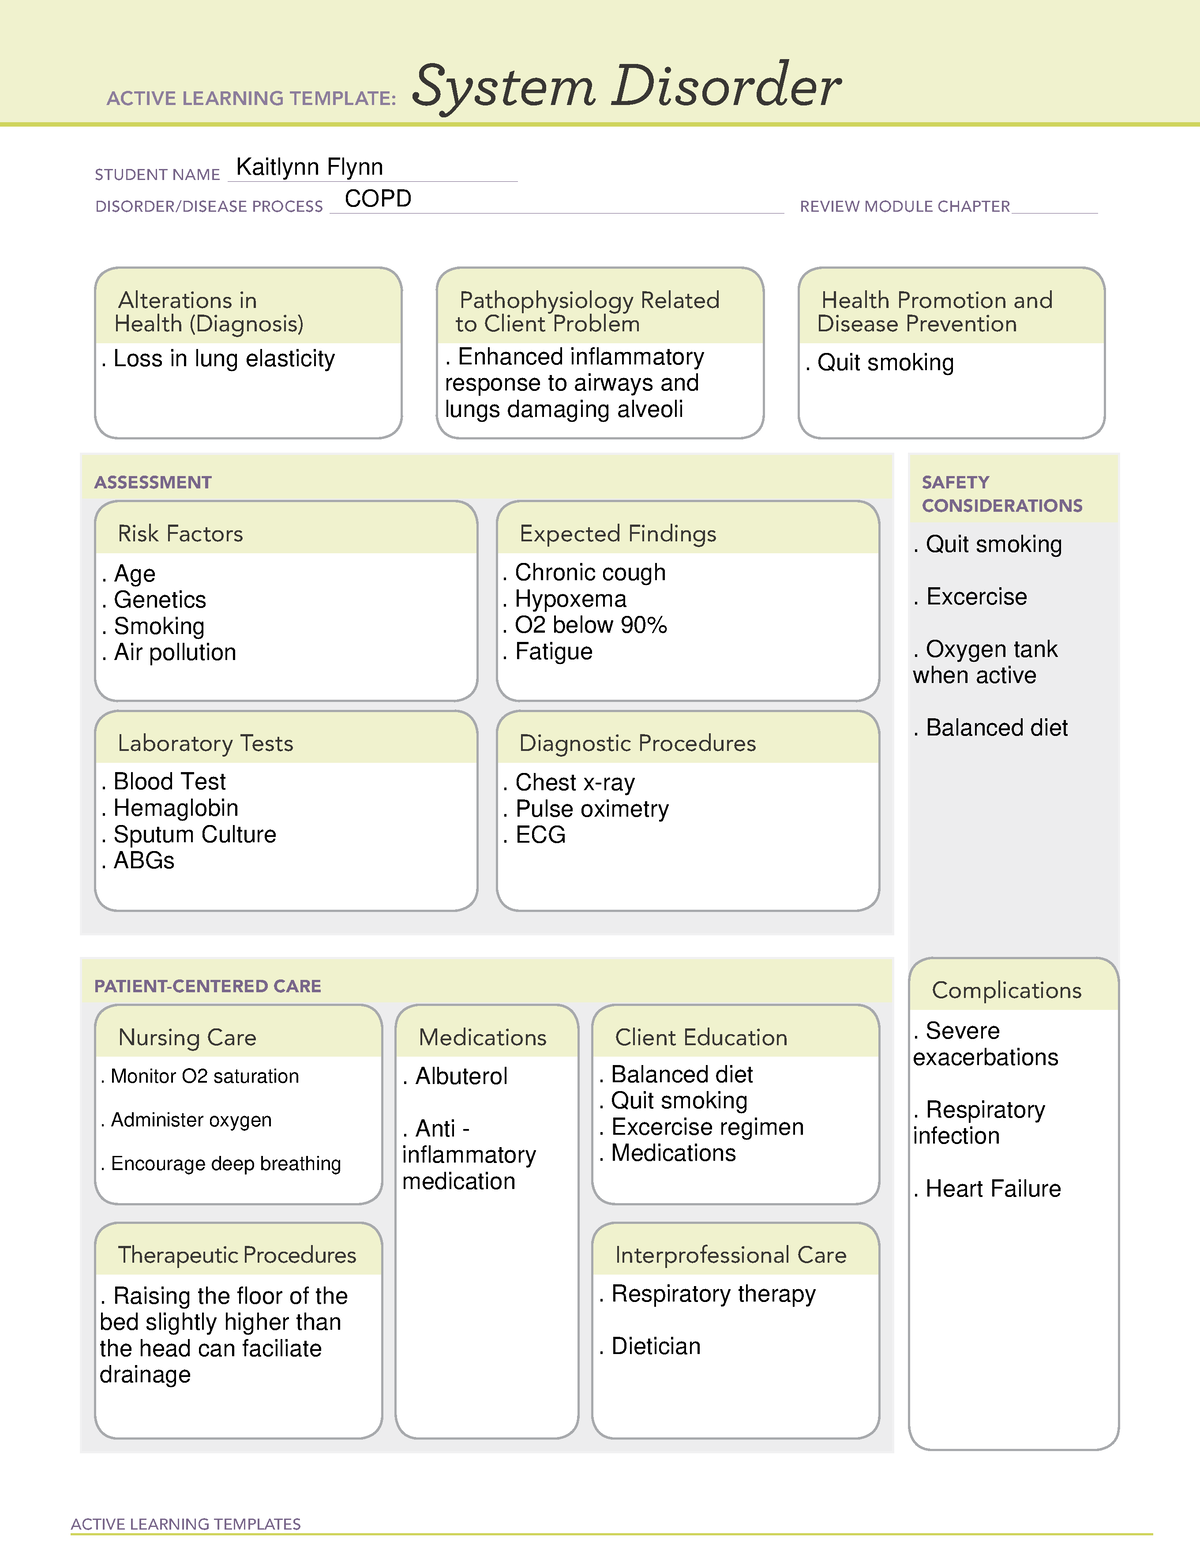 ATI System Disorder COPD ACTIVE LEARNING TEMPLATES System Disorder